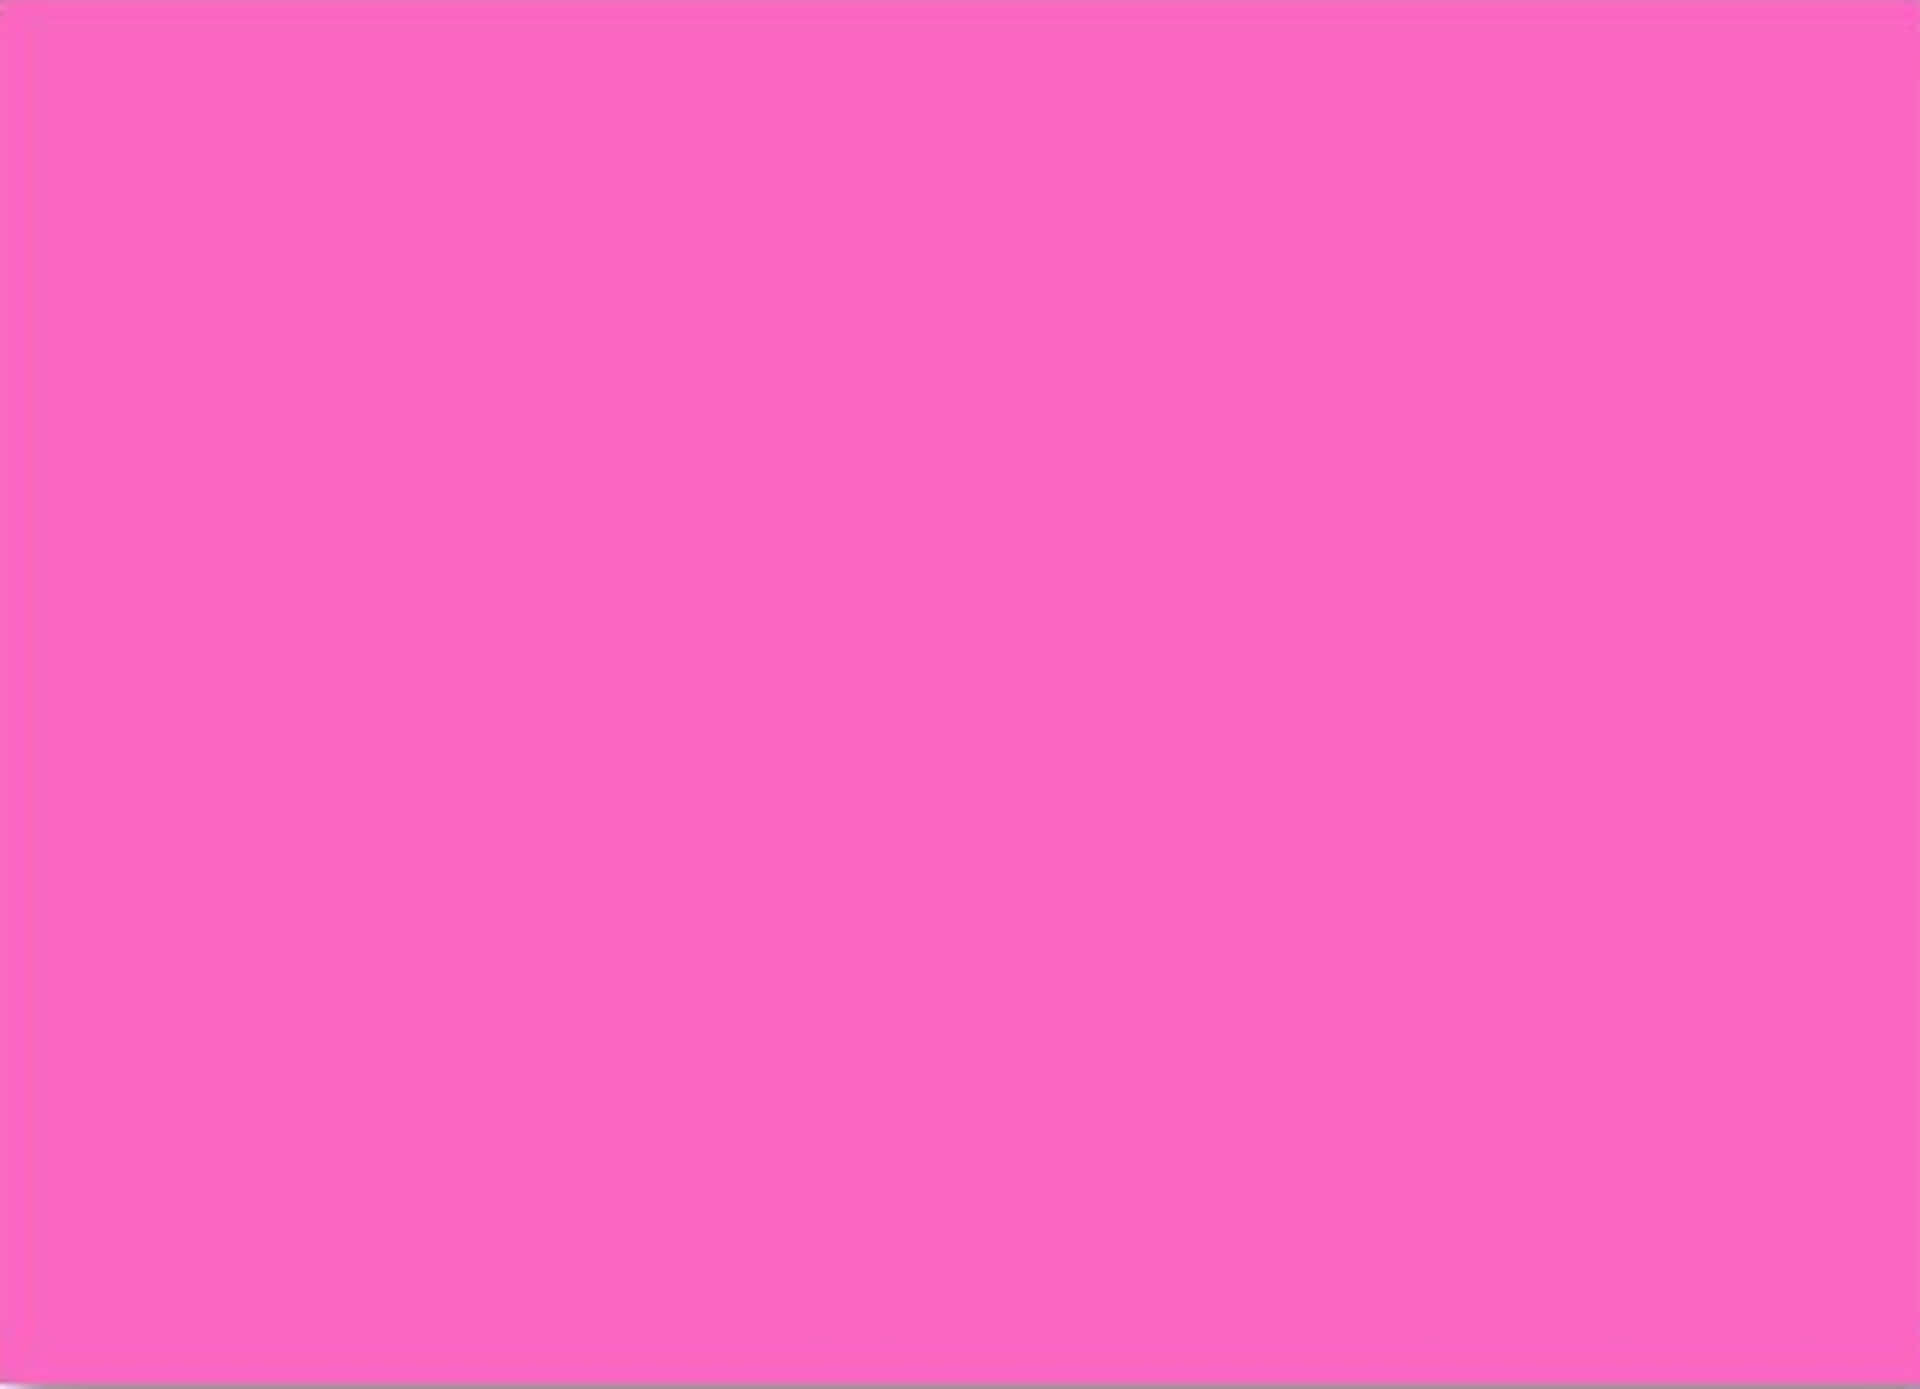 A Pink Square On A White Background Wallpaper